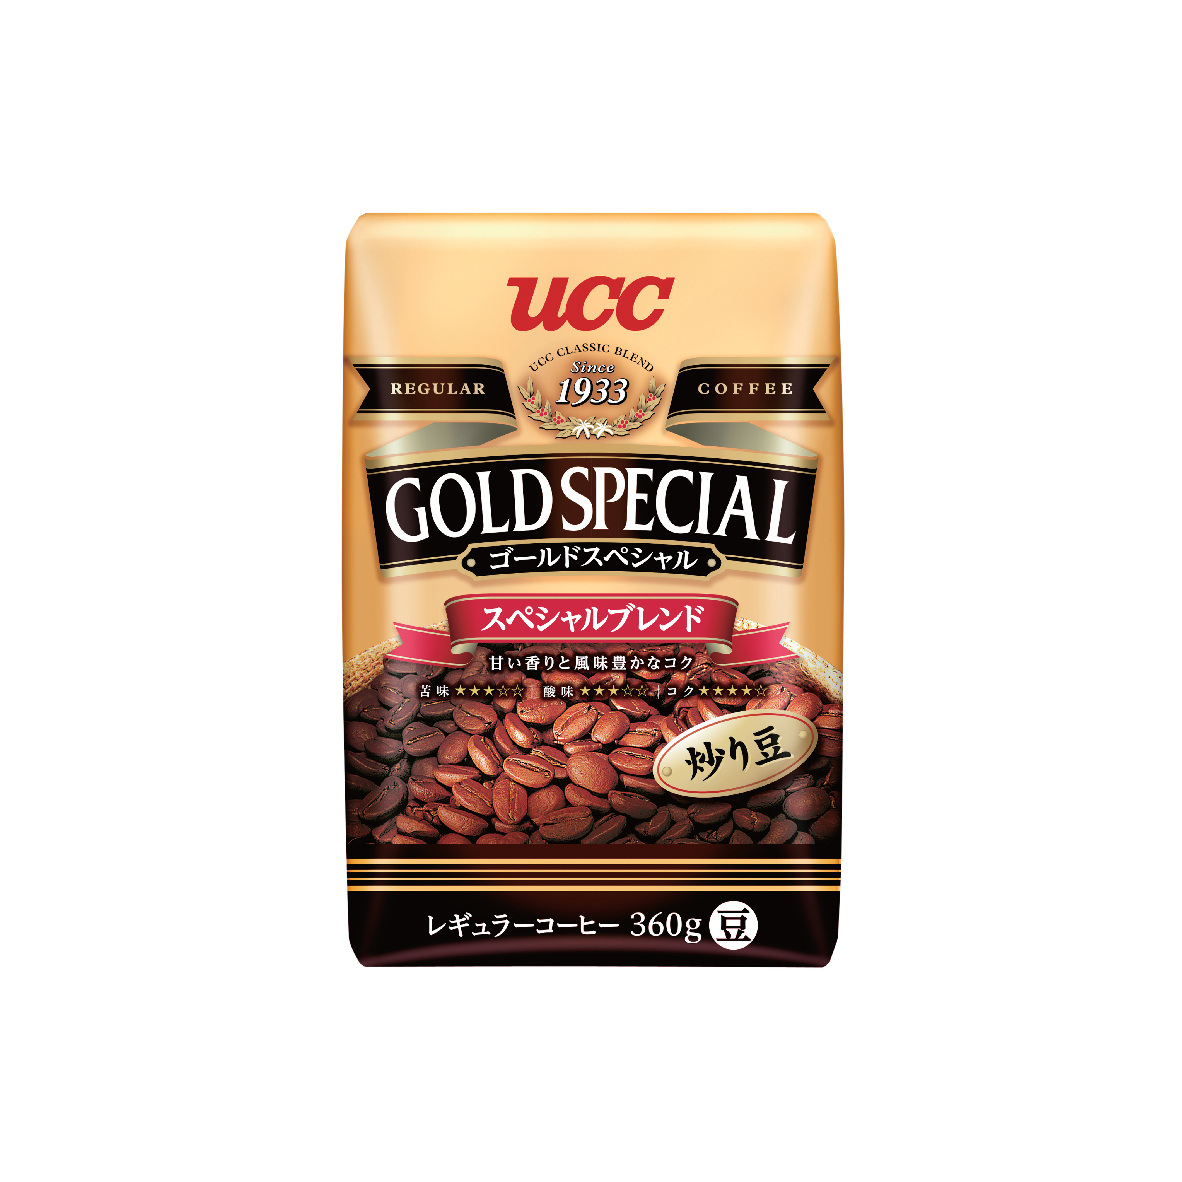 UCC Gold Special Special Blend Roasted Coffee Beans